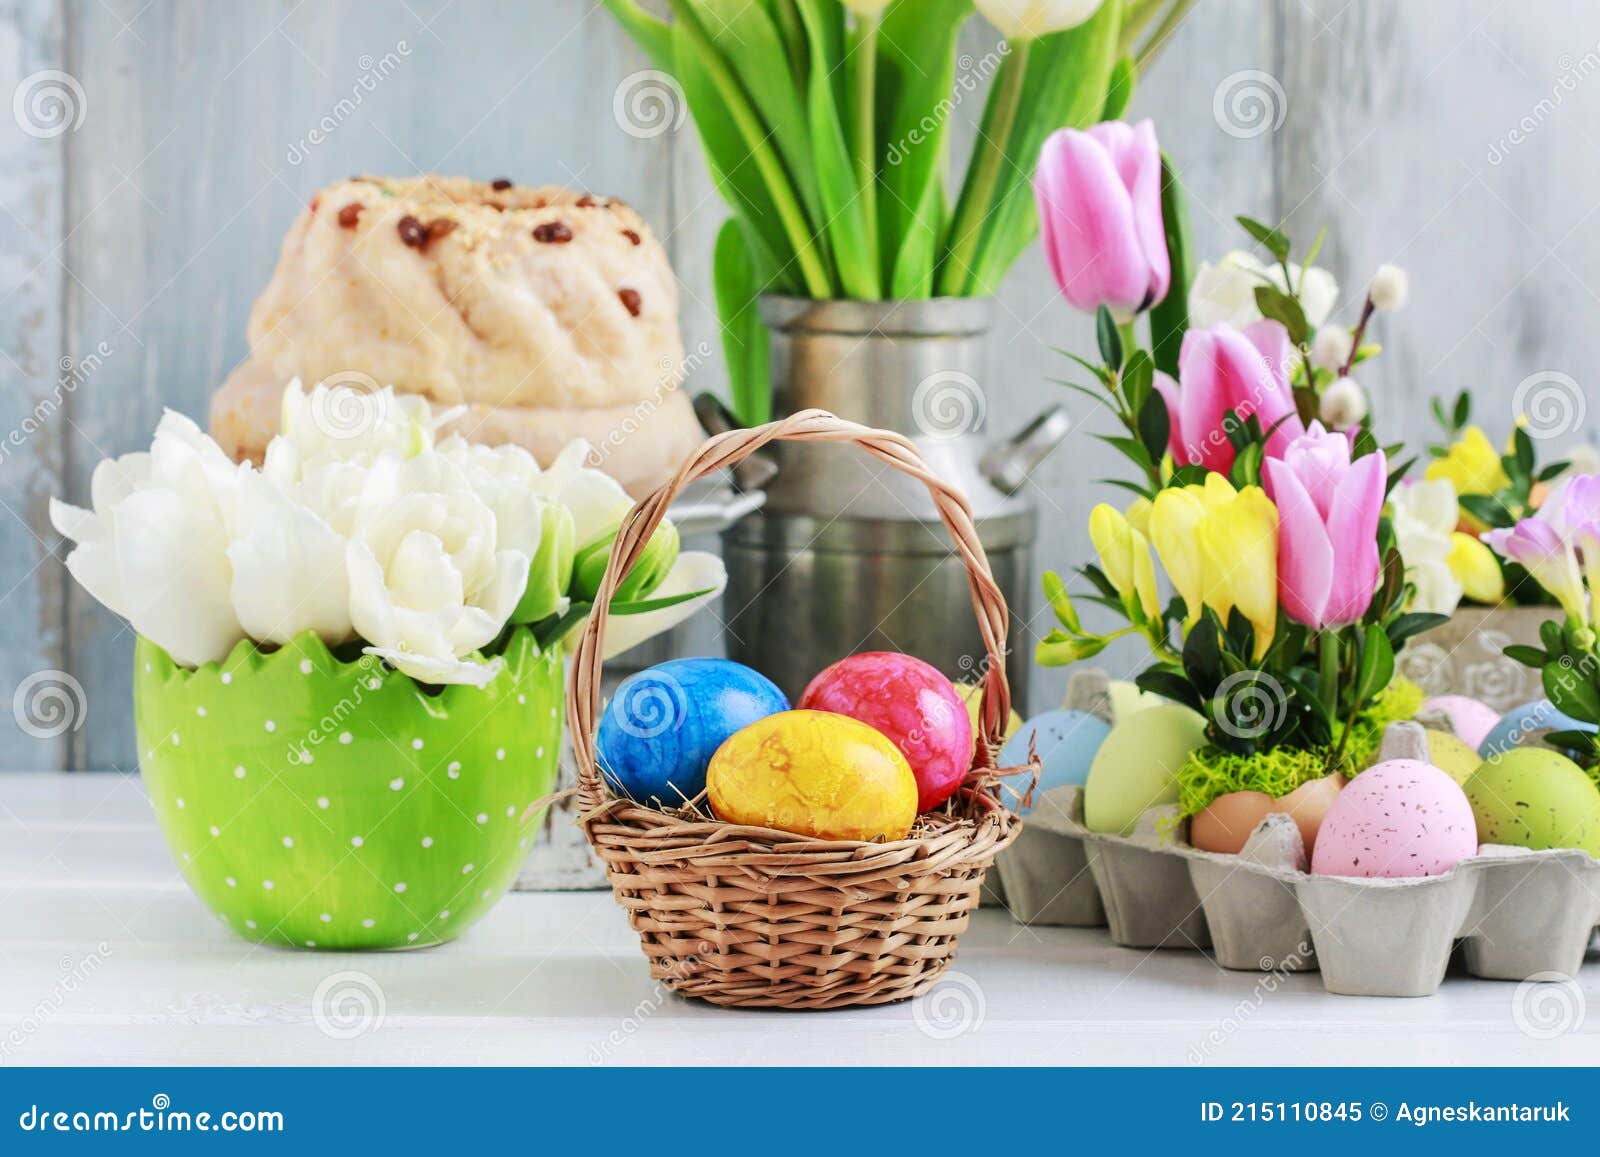 Wicker Basket with Easter Eggs on the Table. Floral Decorations in the ...